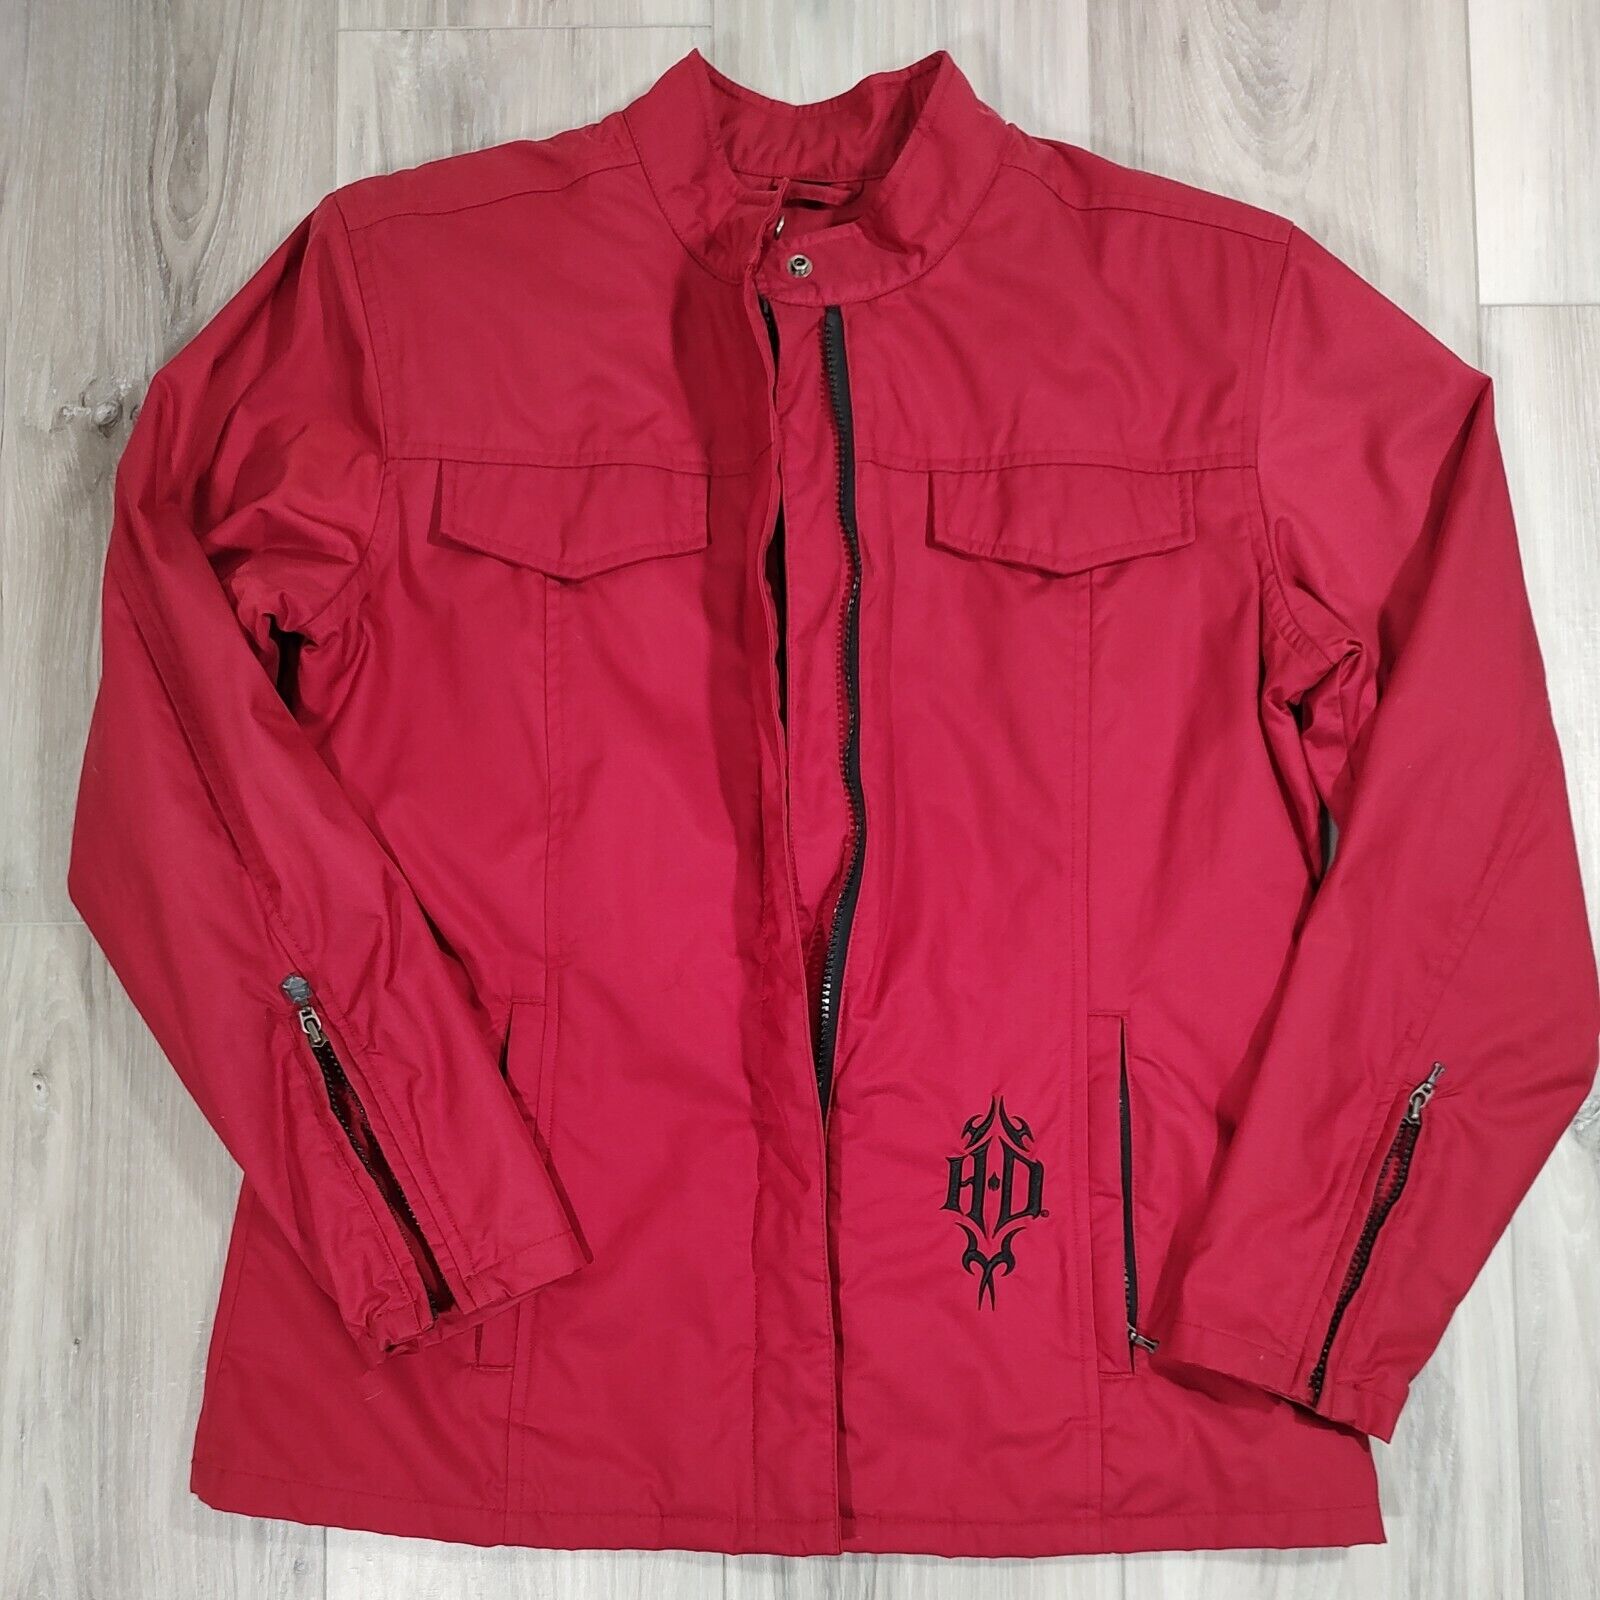 Harley-Davidson Jacket Women\'s Small Red Full Zip Embroidered H-D Logo Used